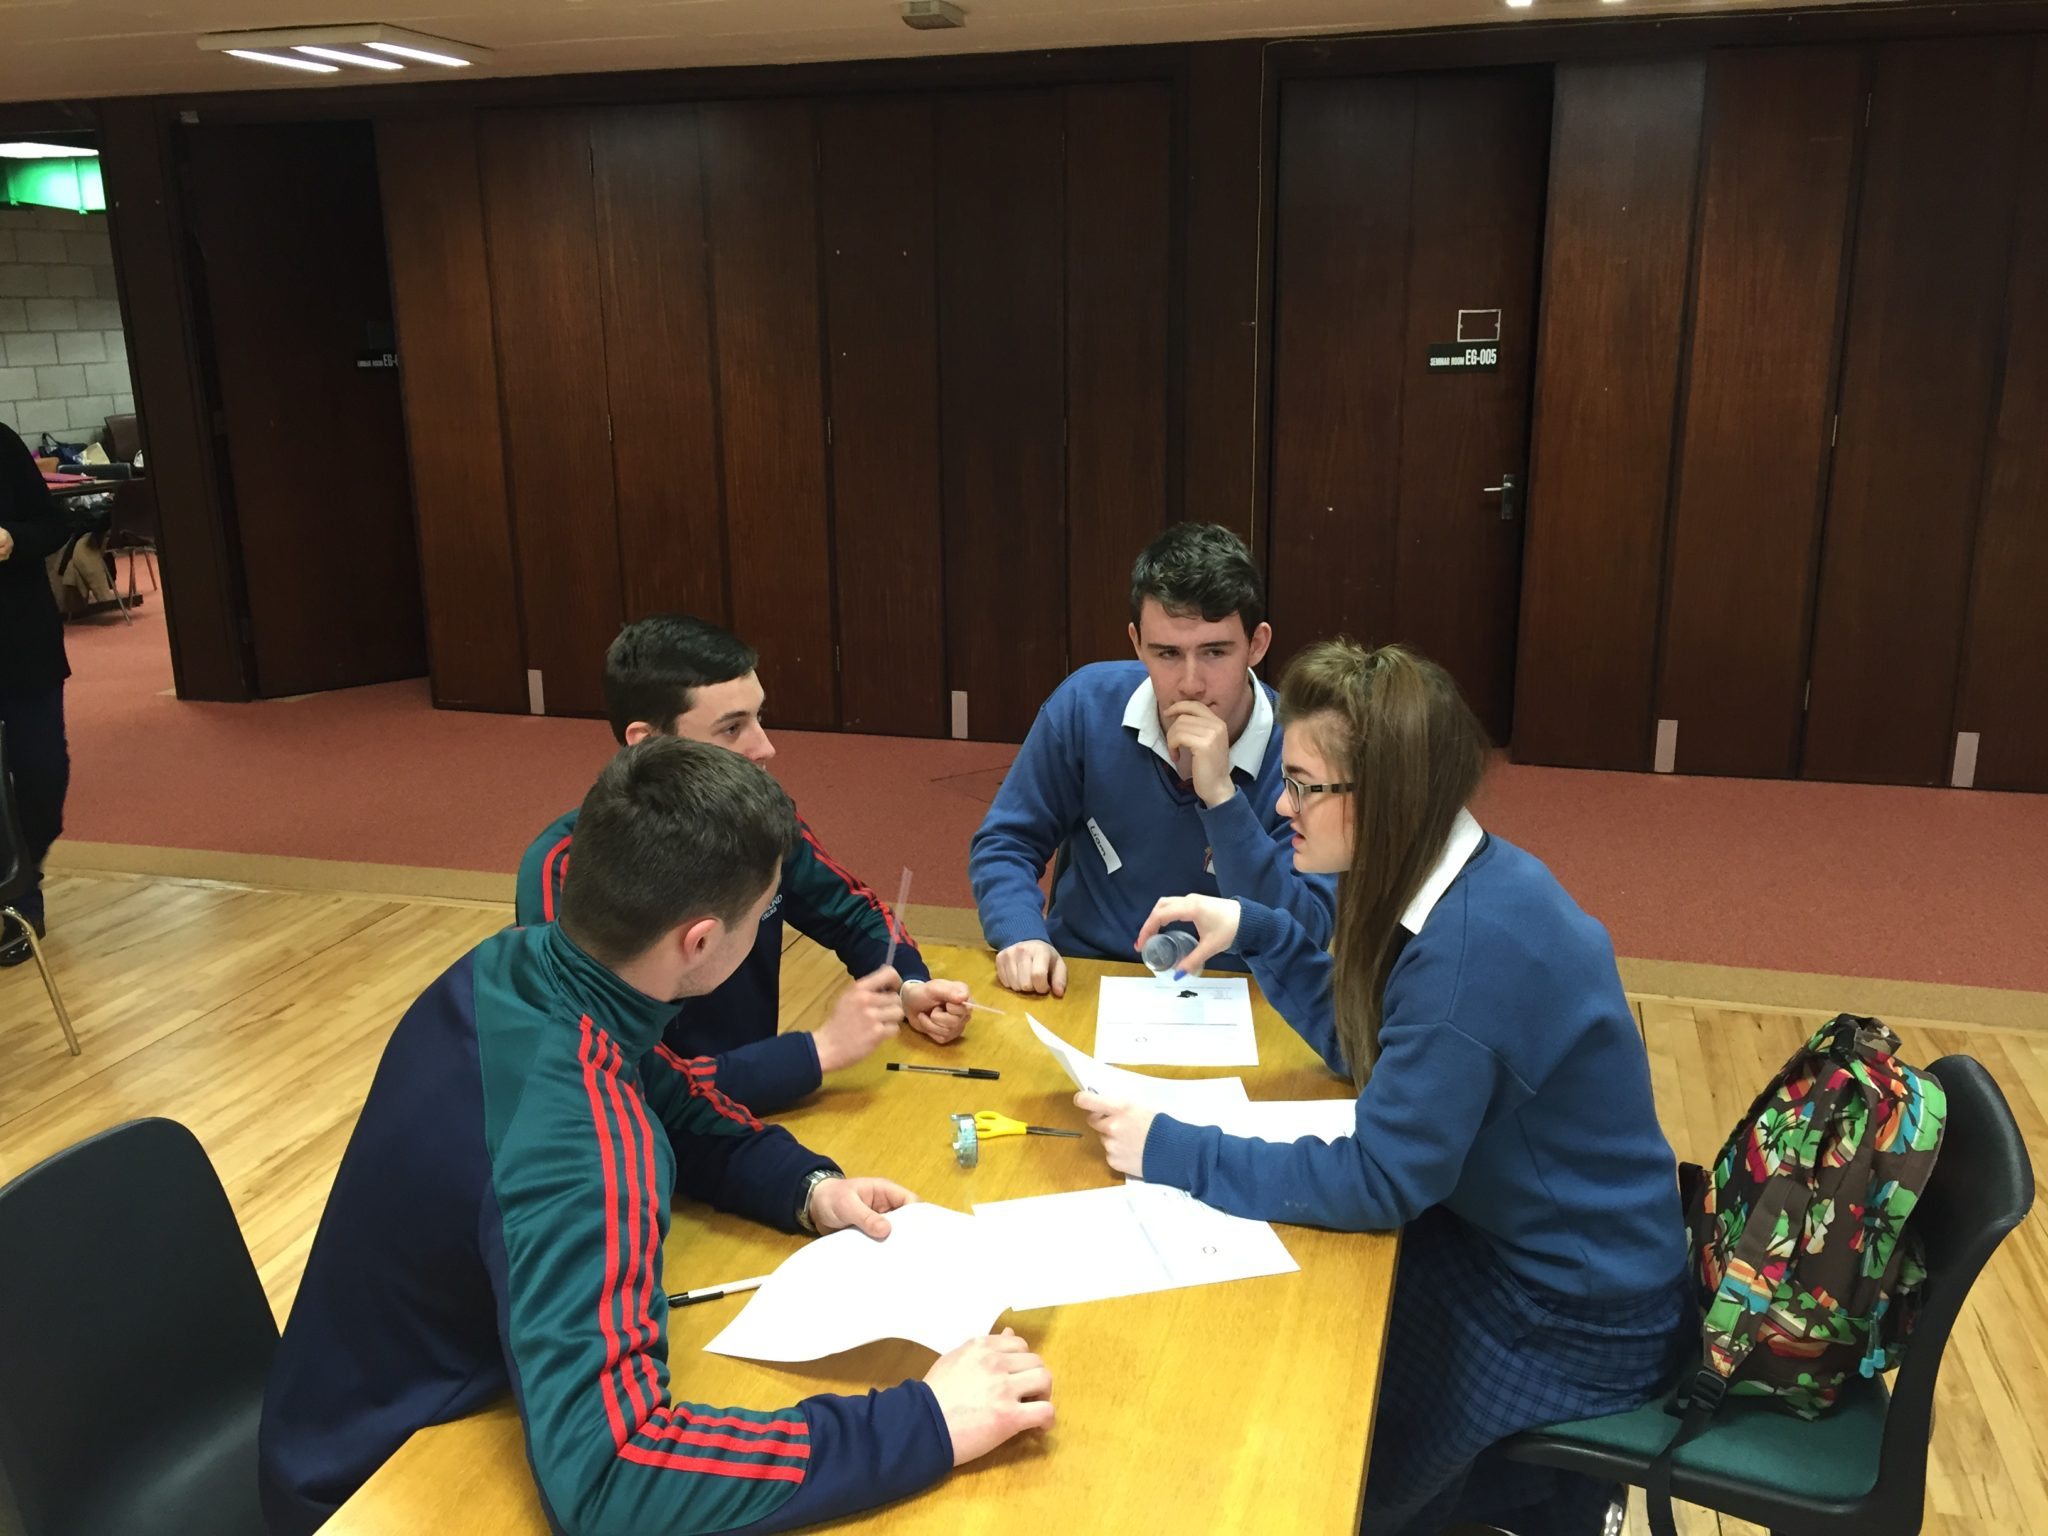 Eoin Considine, Conor Kennedy, Liam Dowling and Claire Mortell use their skills of inquiry at the University of Limerick